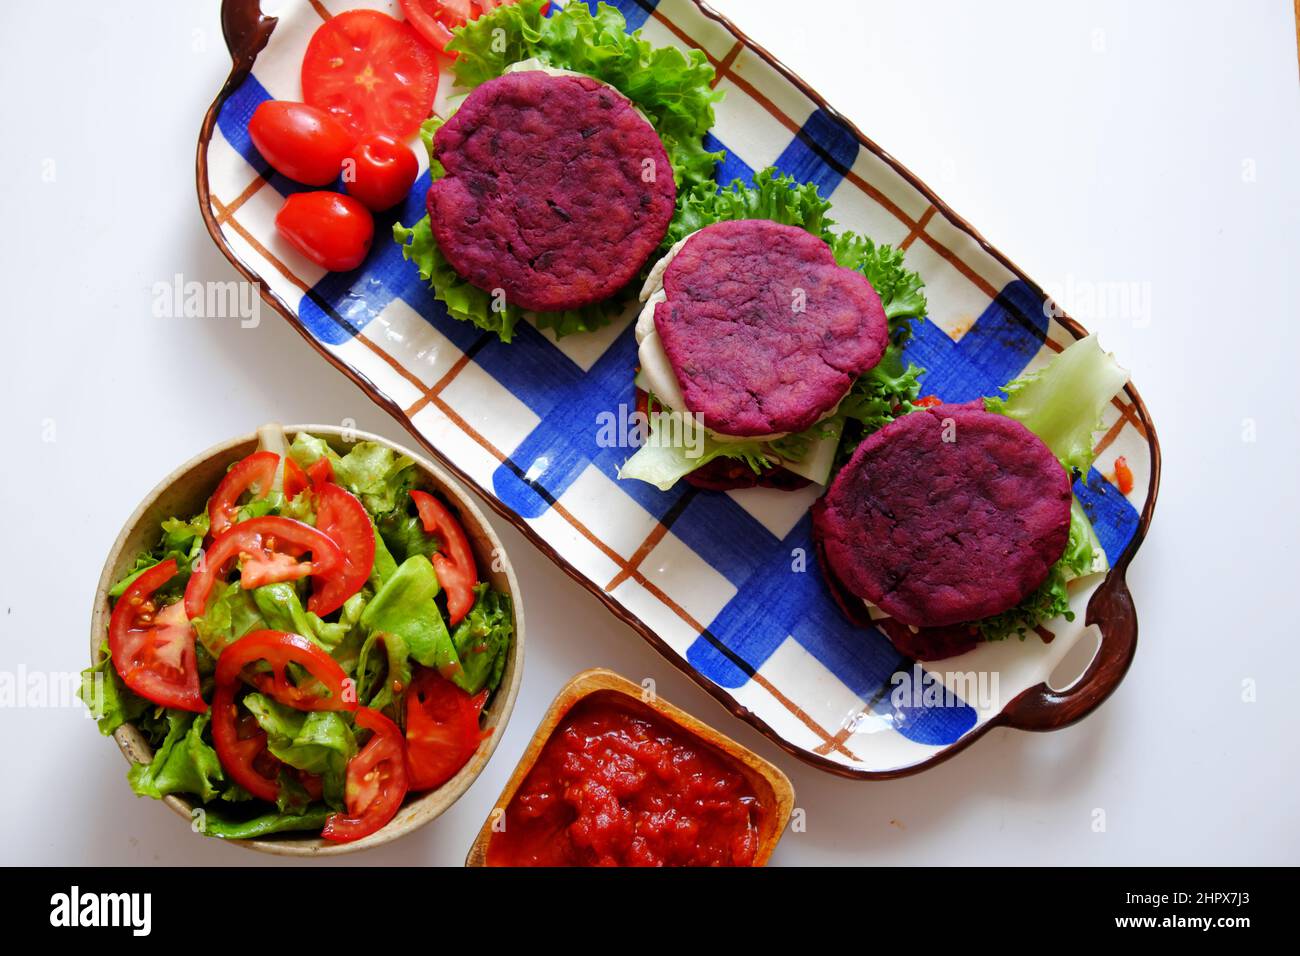 Amazing colorful raw material food for vegan hamburger from violet sweet potato with tomato sauce, salad, cucumber, healthy food for breakfast that ri Stock Photo